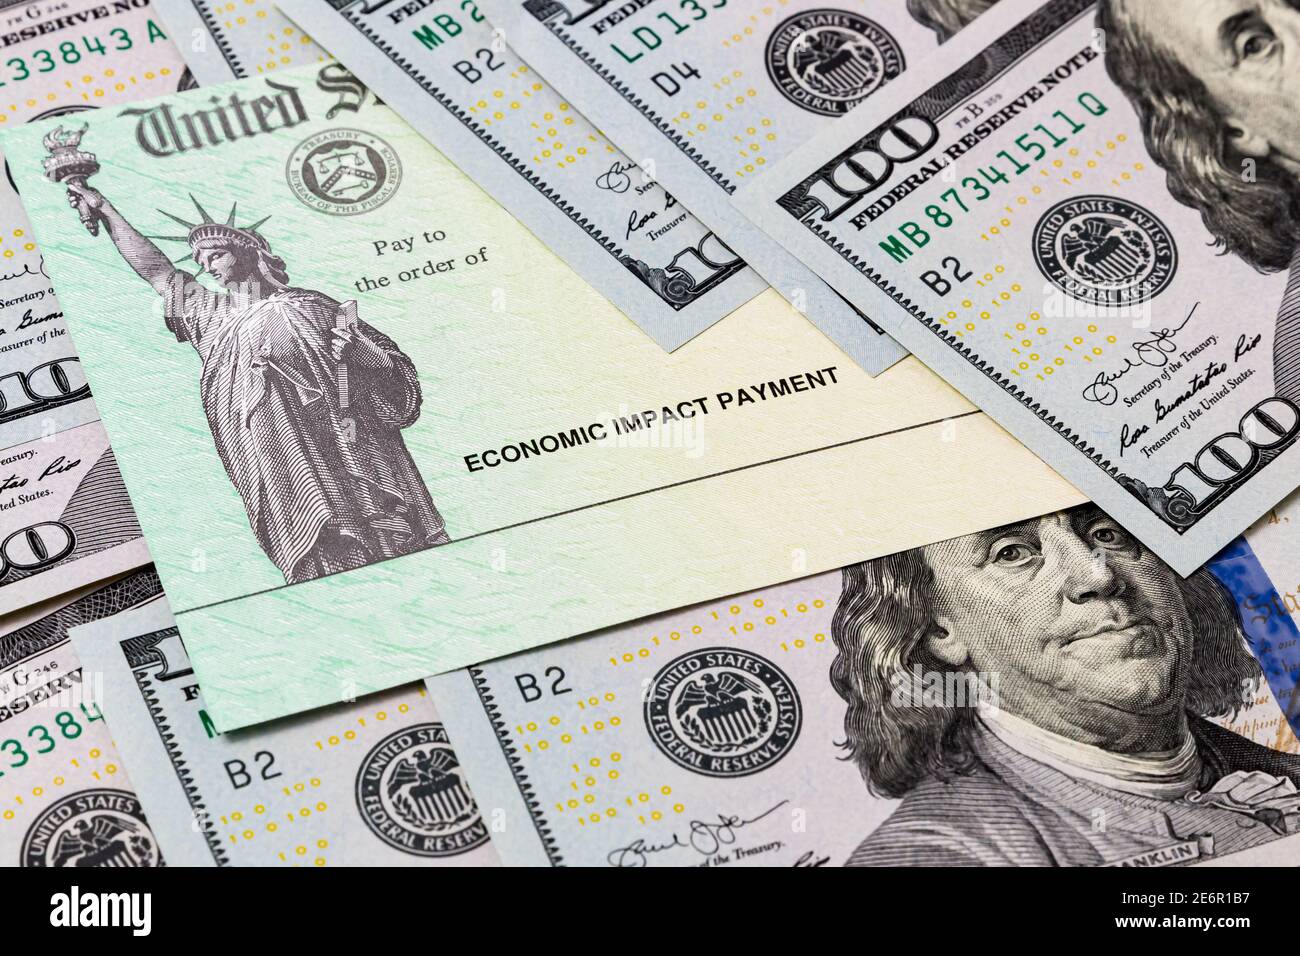 Economic impact stimulus treasury check and 100 dollar bills. Concept of aid, relief and unemployment insurance payment during Covid-19 coronavirus pa Stock Photo